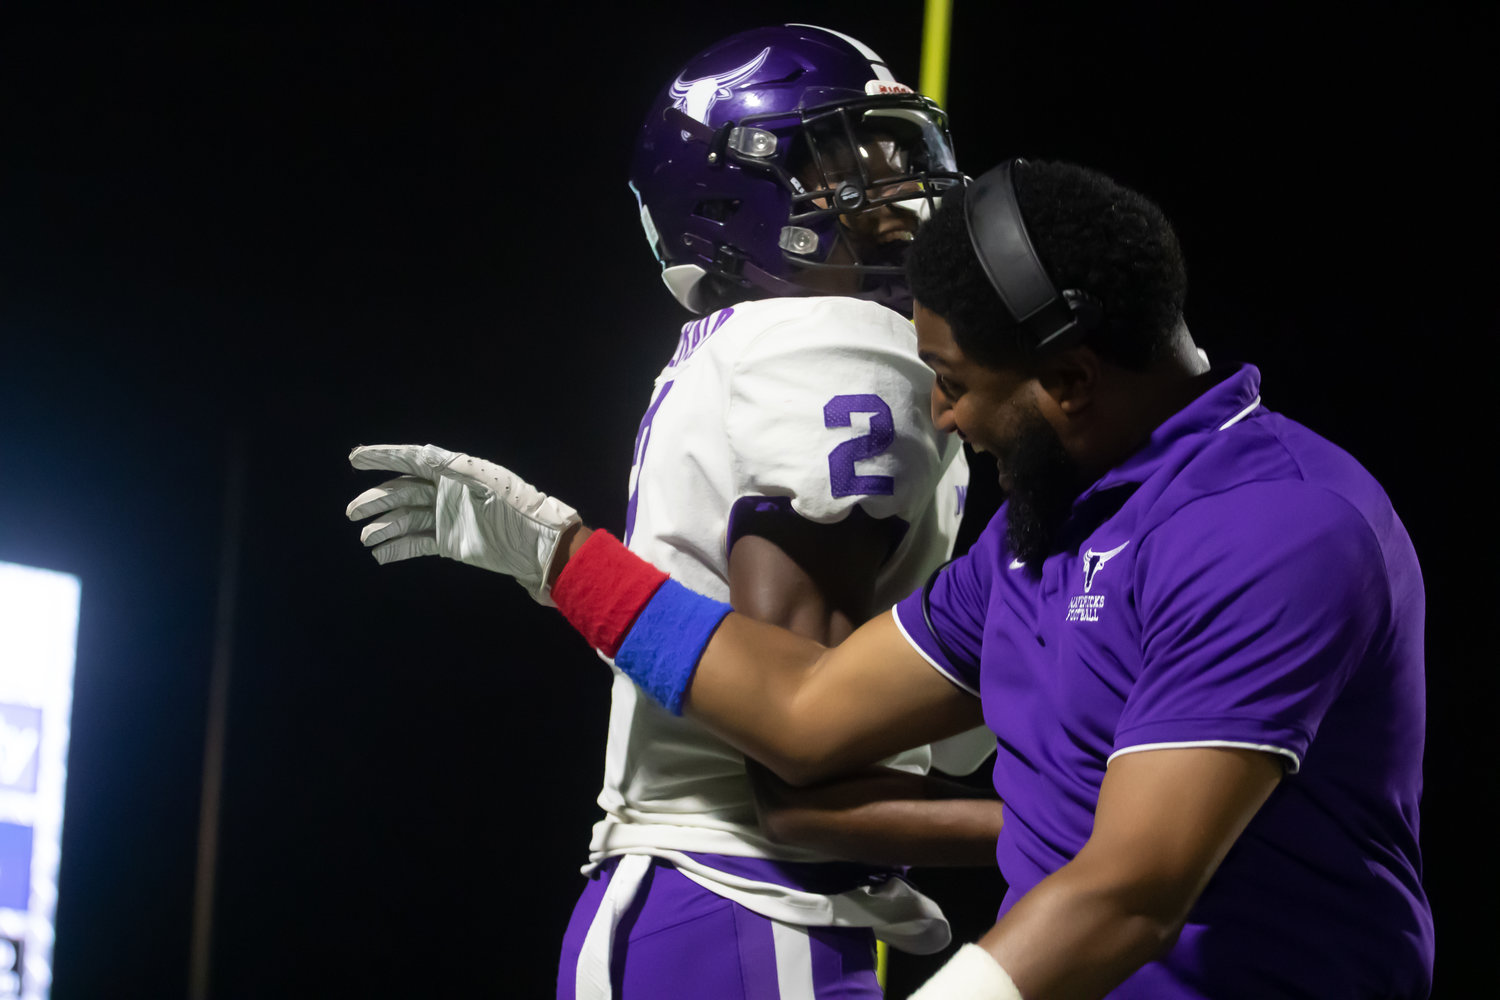 Morton Ranch's Mike Gerald celebrates after a touchdown during Thursday's game between Morton Ranch and Jordan at Rhodes Stadium.